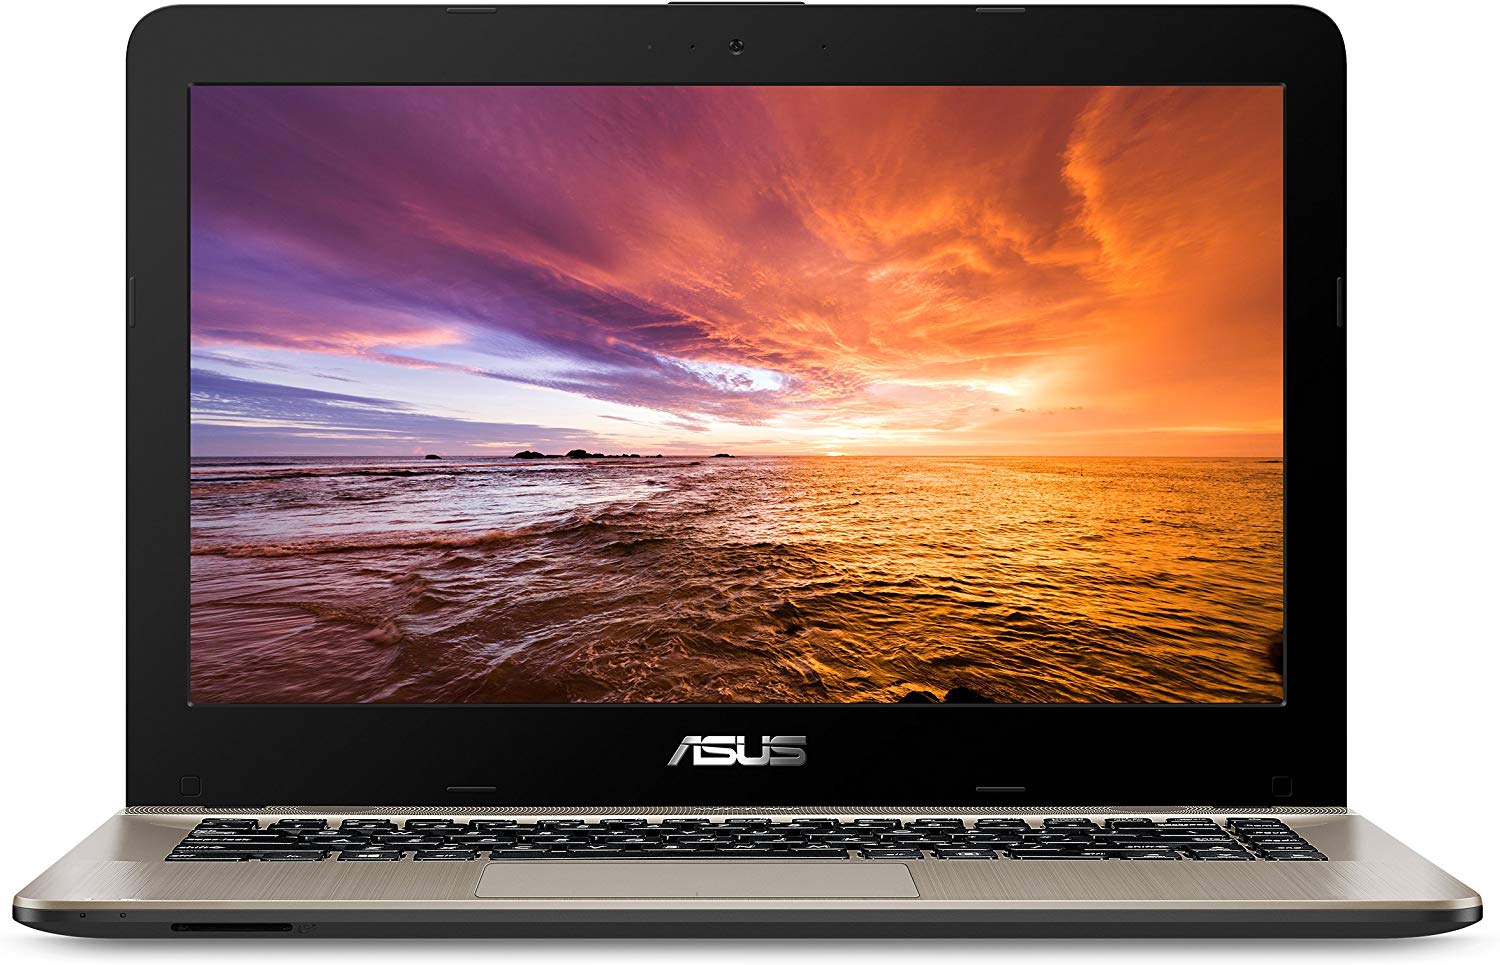 ASUS VivoBook F441 Light and Powerful Laptop